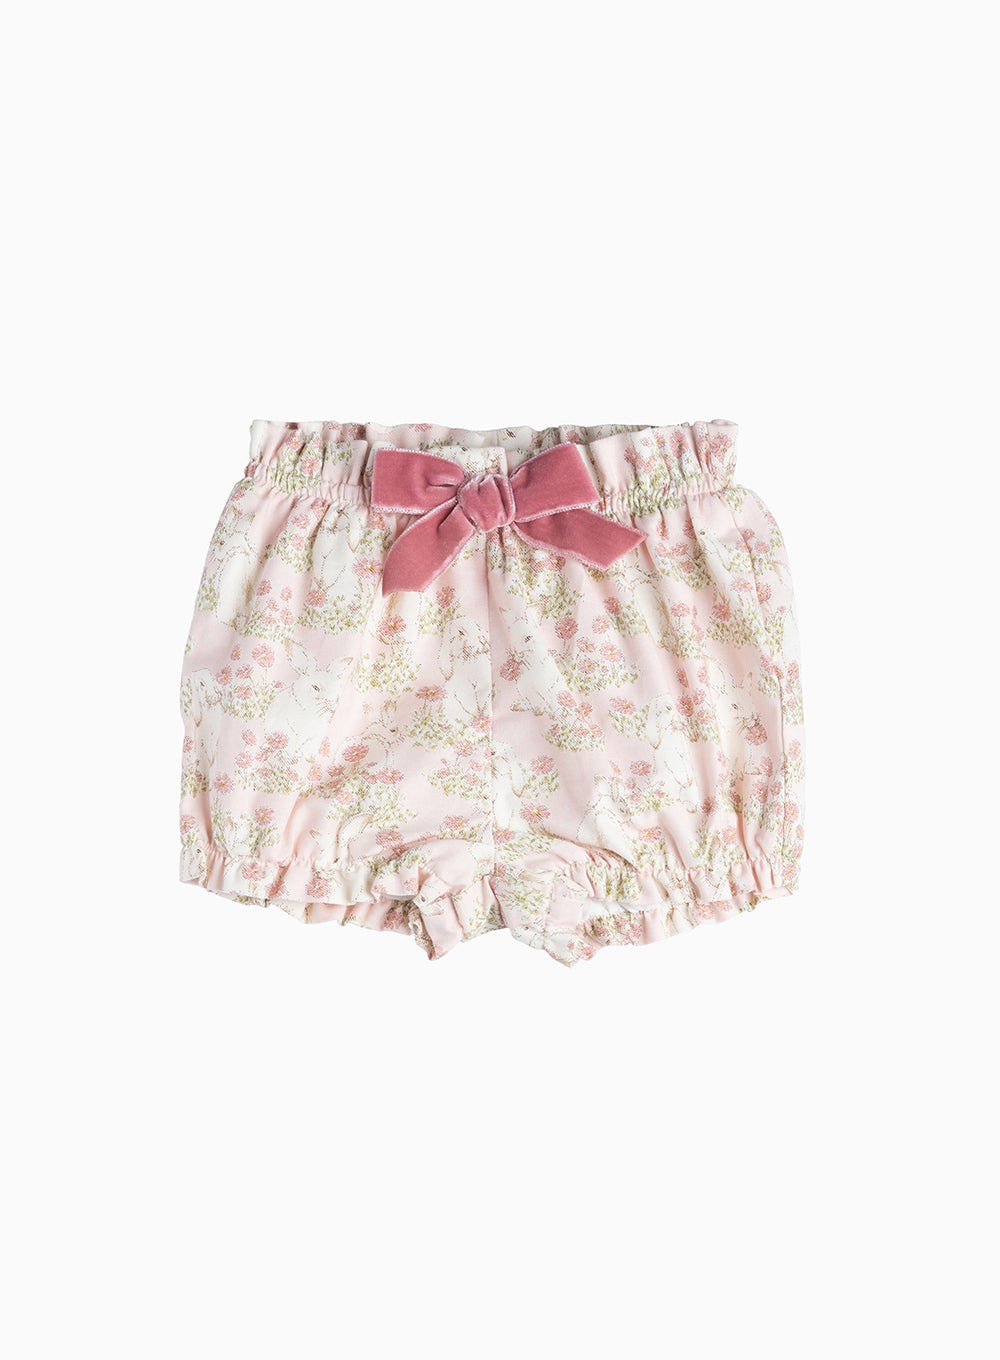 Confiture Bloomers Little Bow Bloomers in Pale Pink Bunny